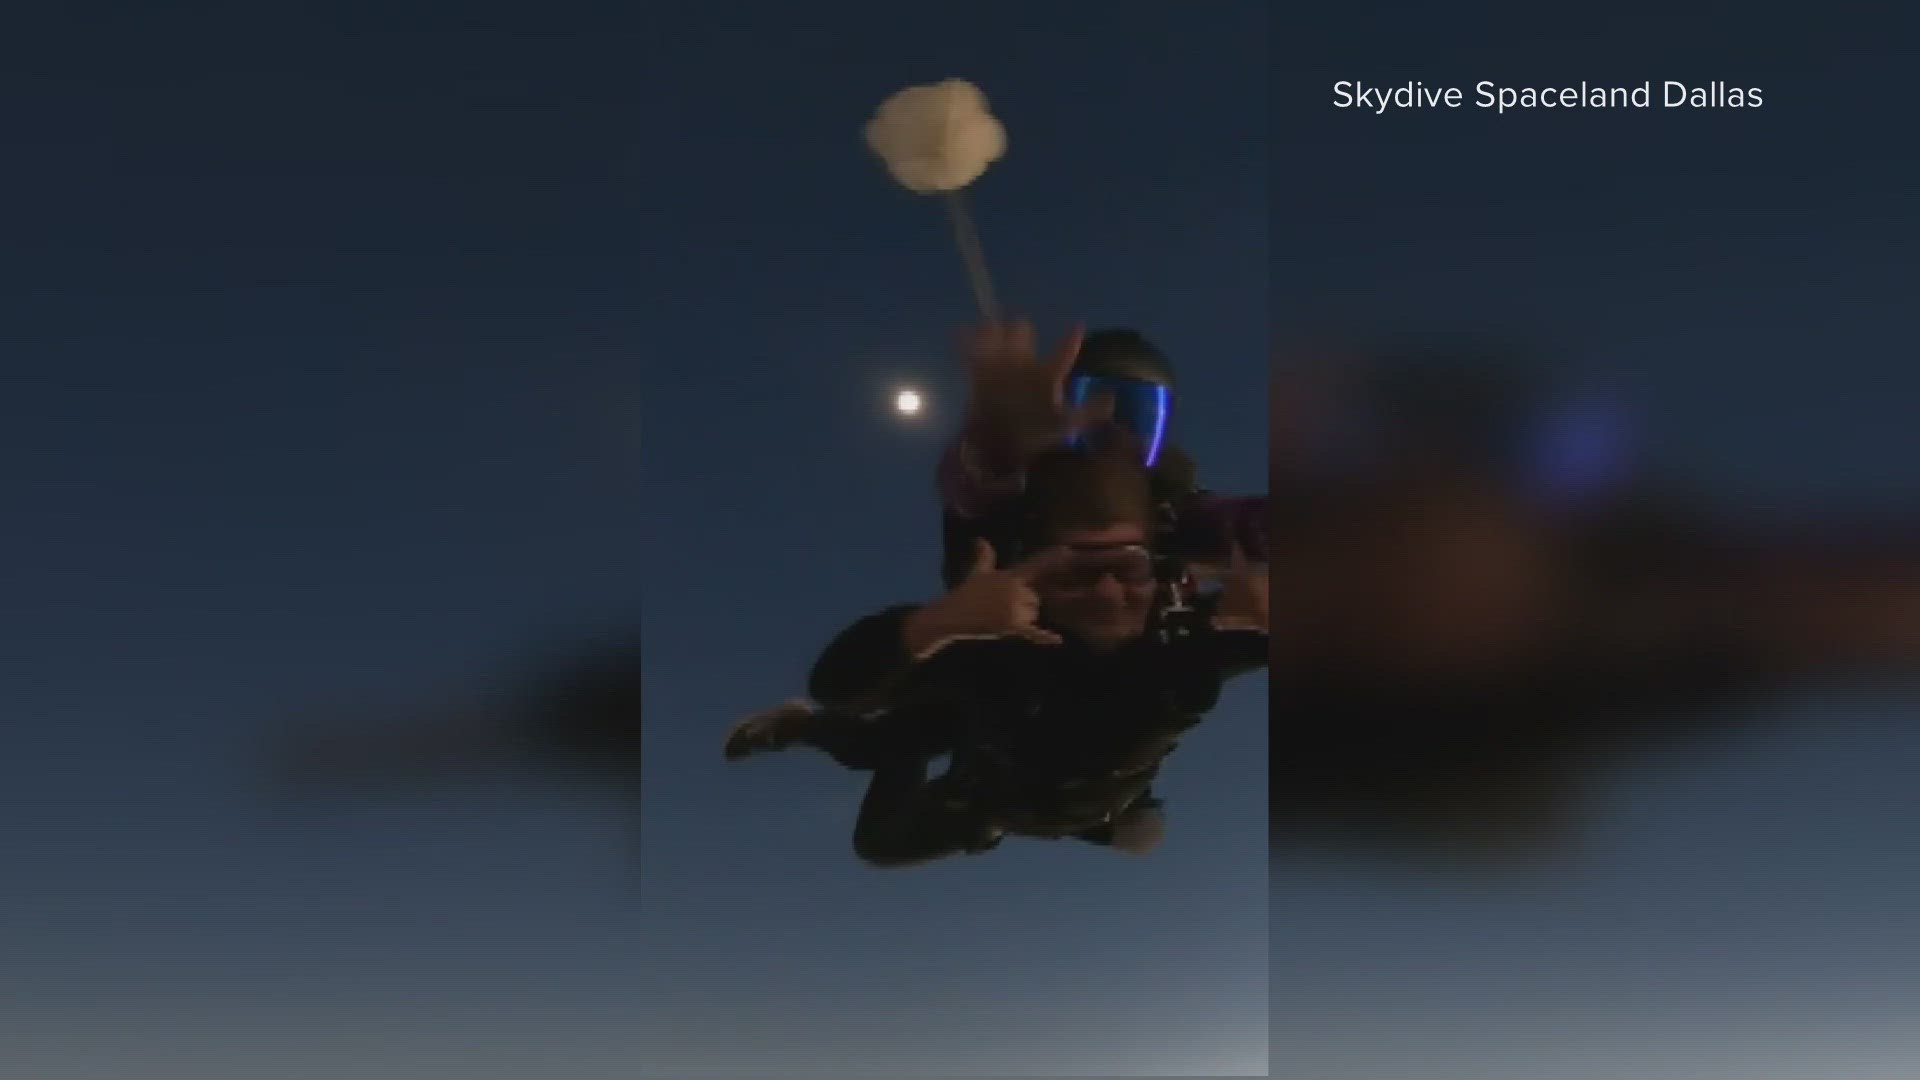 The sun and moon aligned perfection for over 40 skydivers and a mom who welcomed her latest addition to her family.